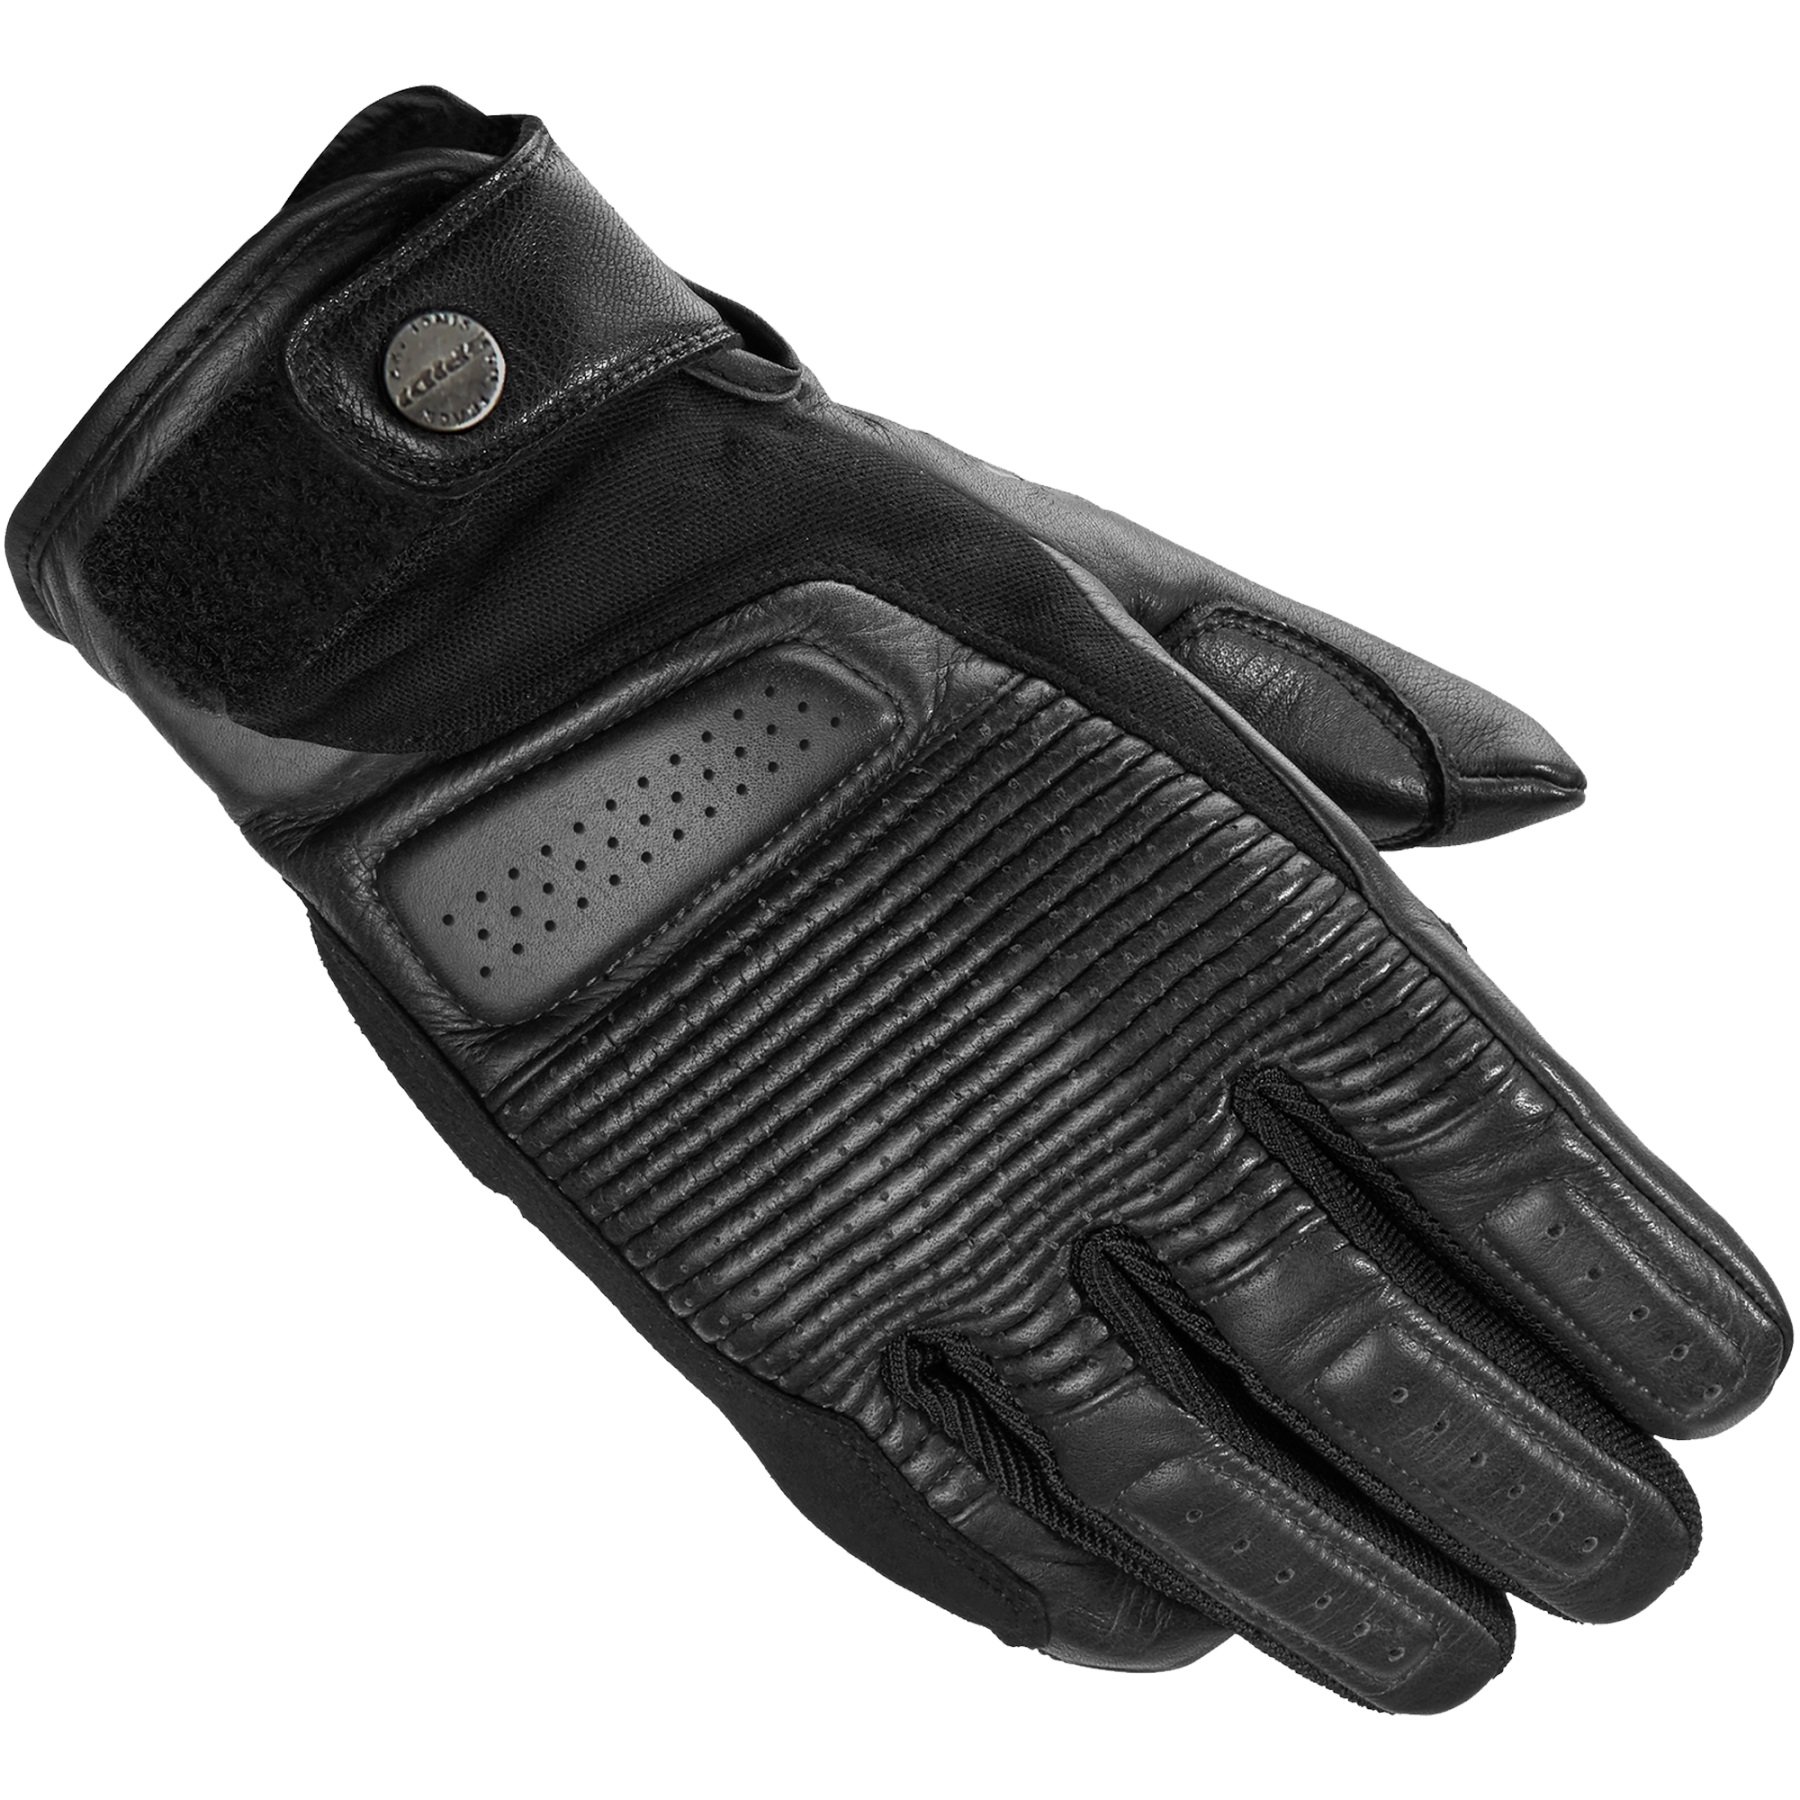 Image of Spidi Clubber Black Motorcycle Gloves Talla 2XL